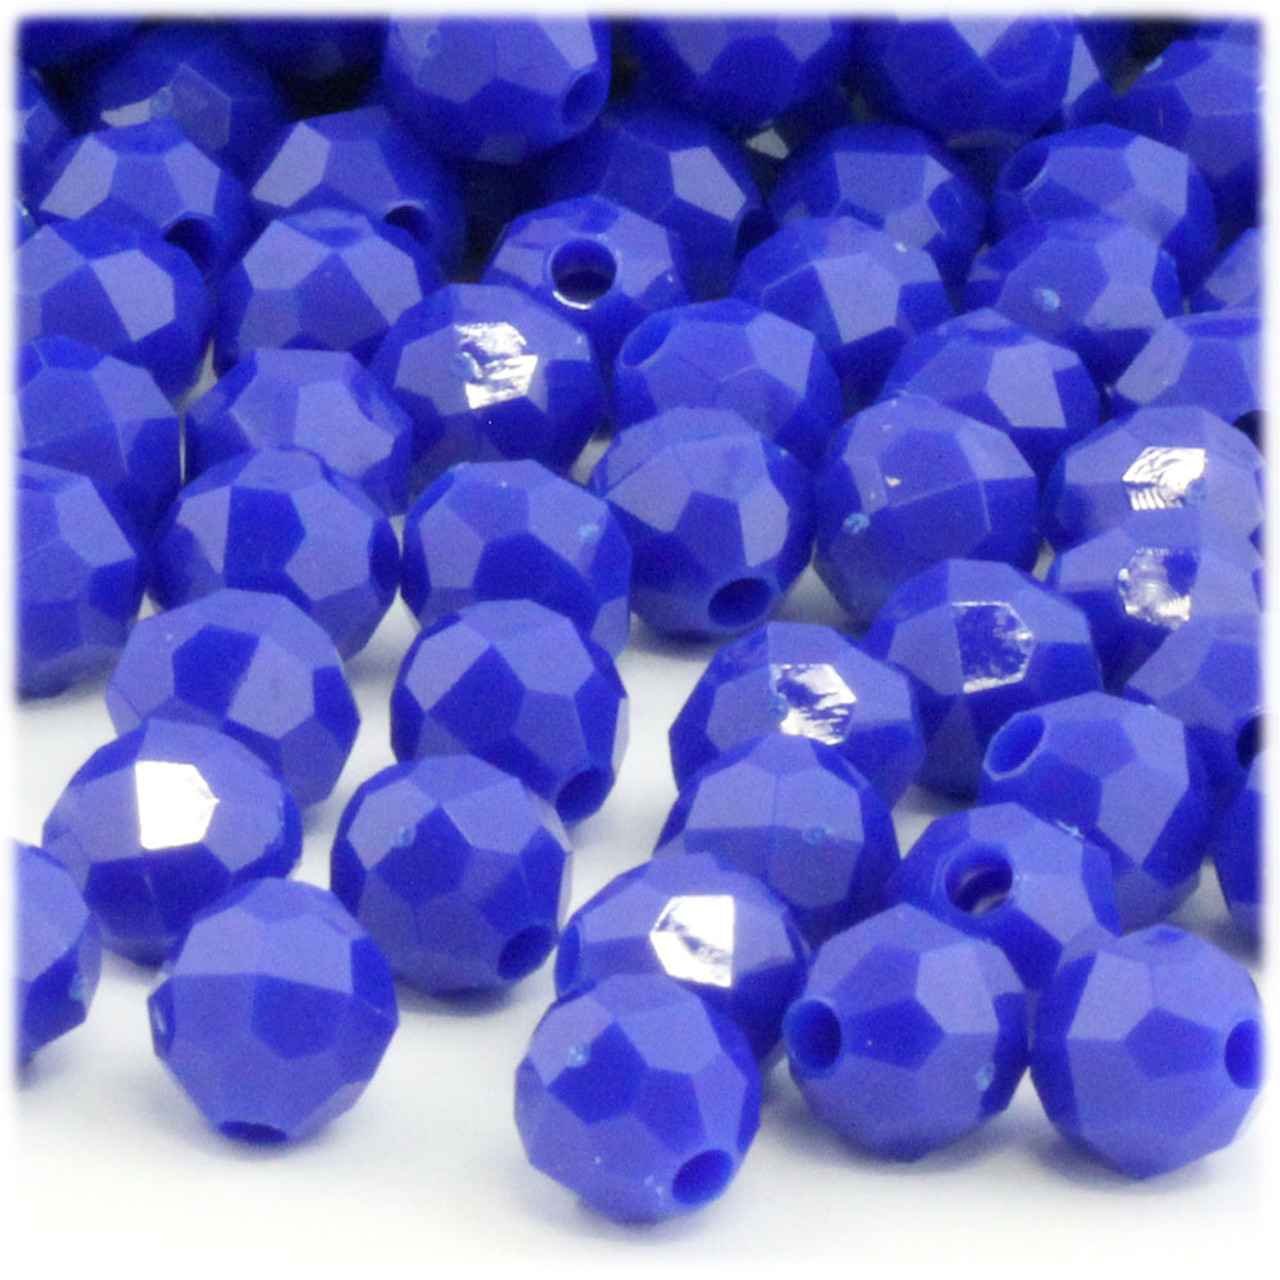 Glass Beads, Assorted, 6-12mm, 1oz=28g, The Crafts Outlet